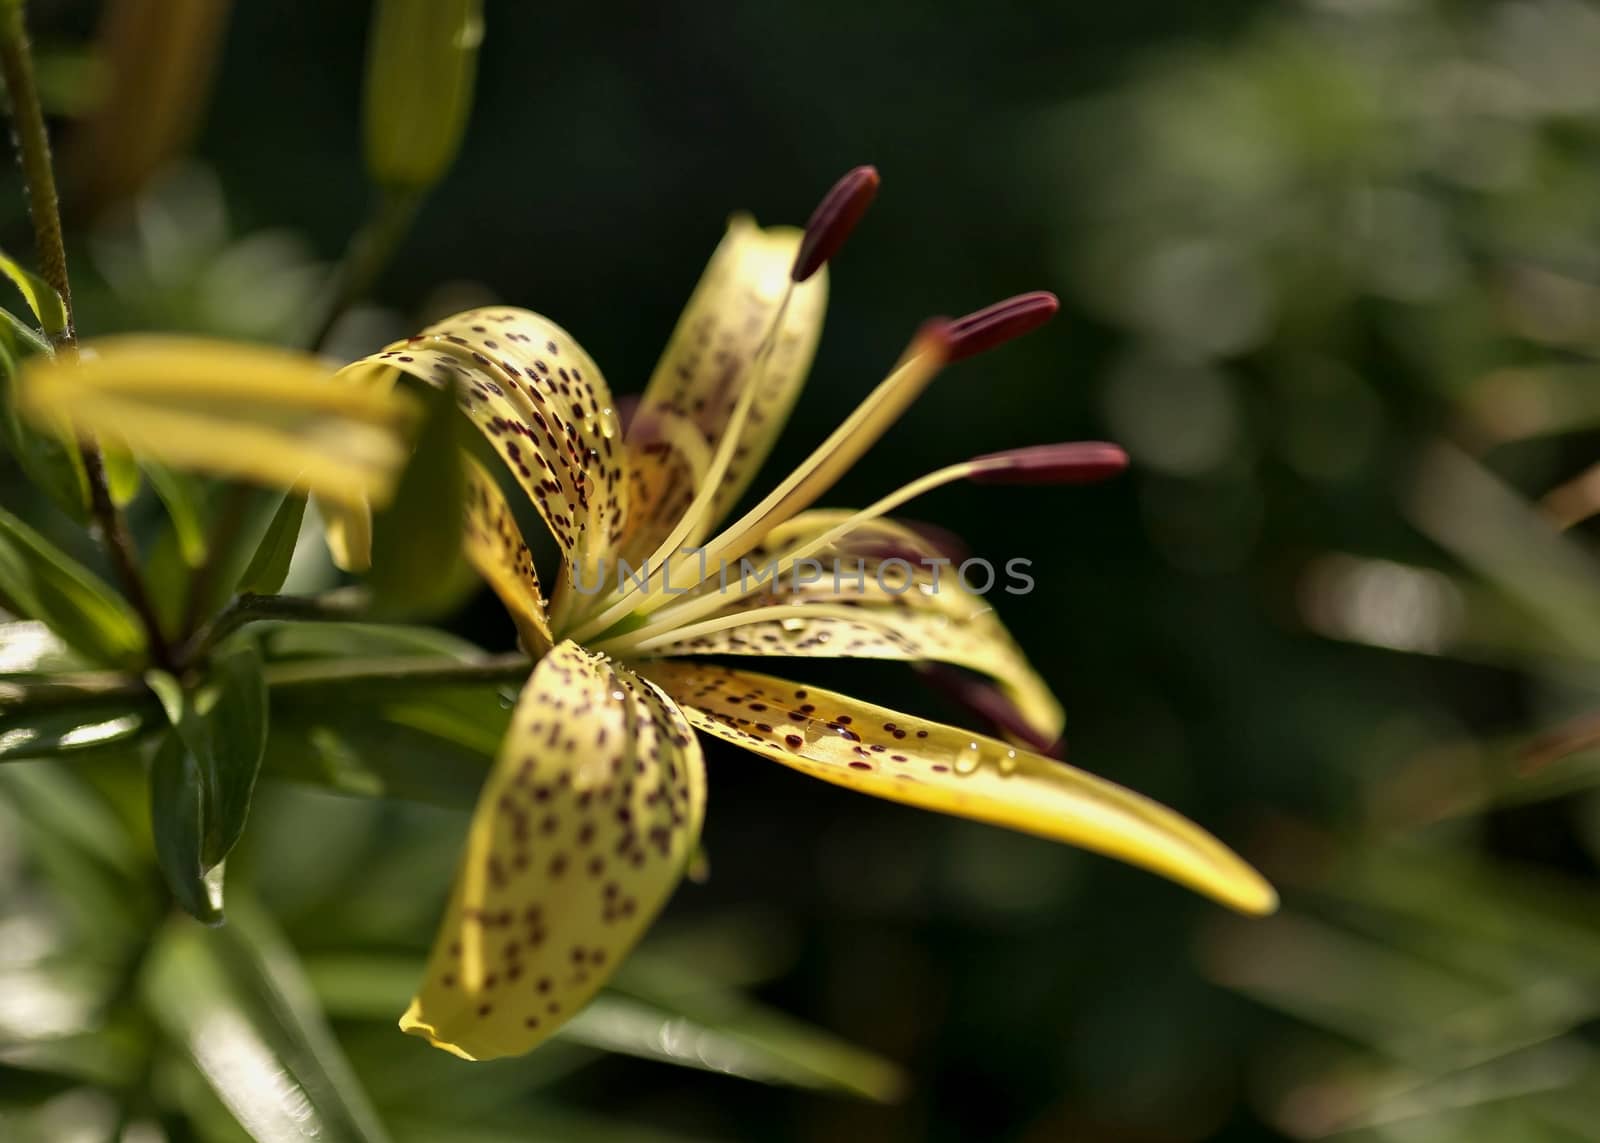 blooms yellow tiger Lily with dew drops on the petals by valerypetr